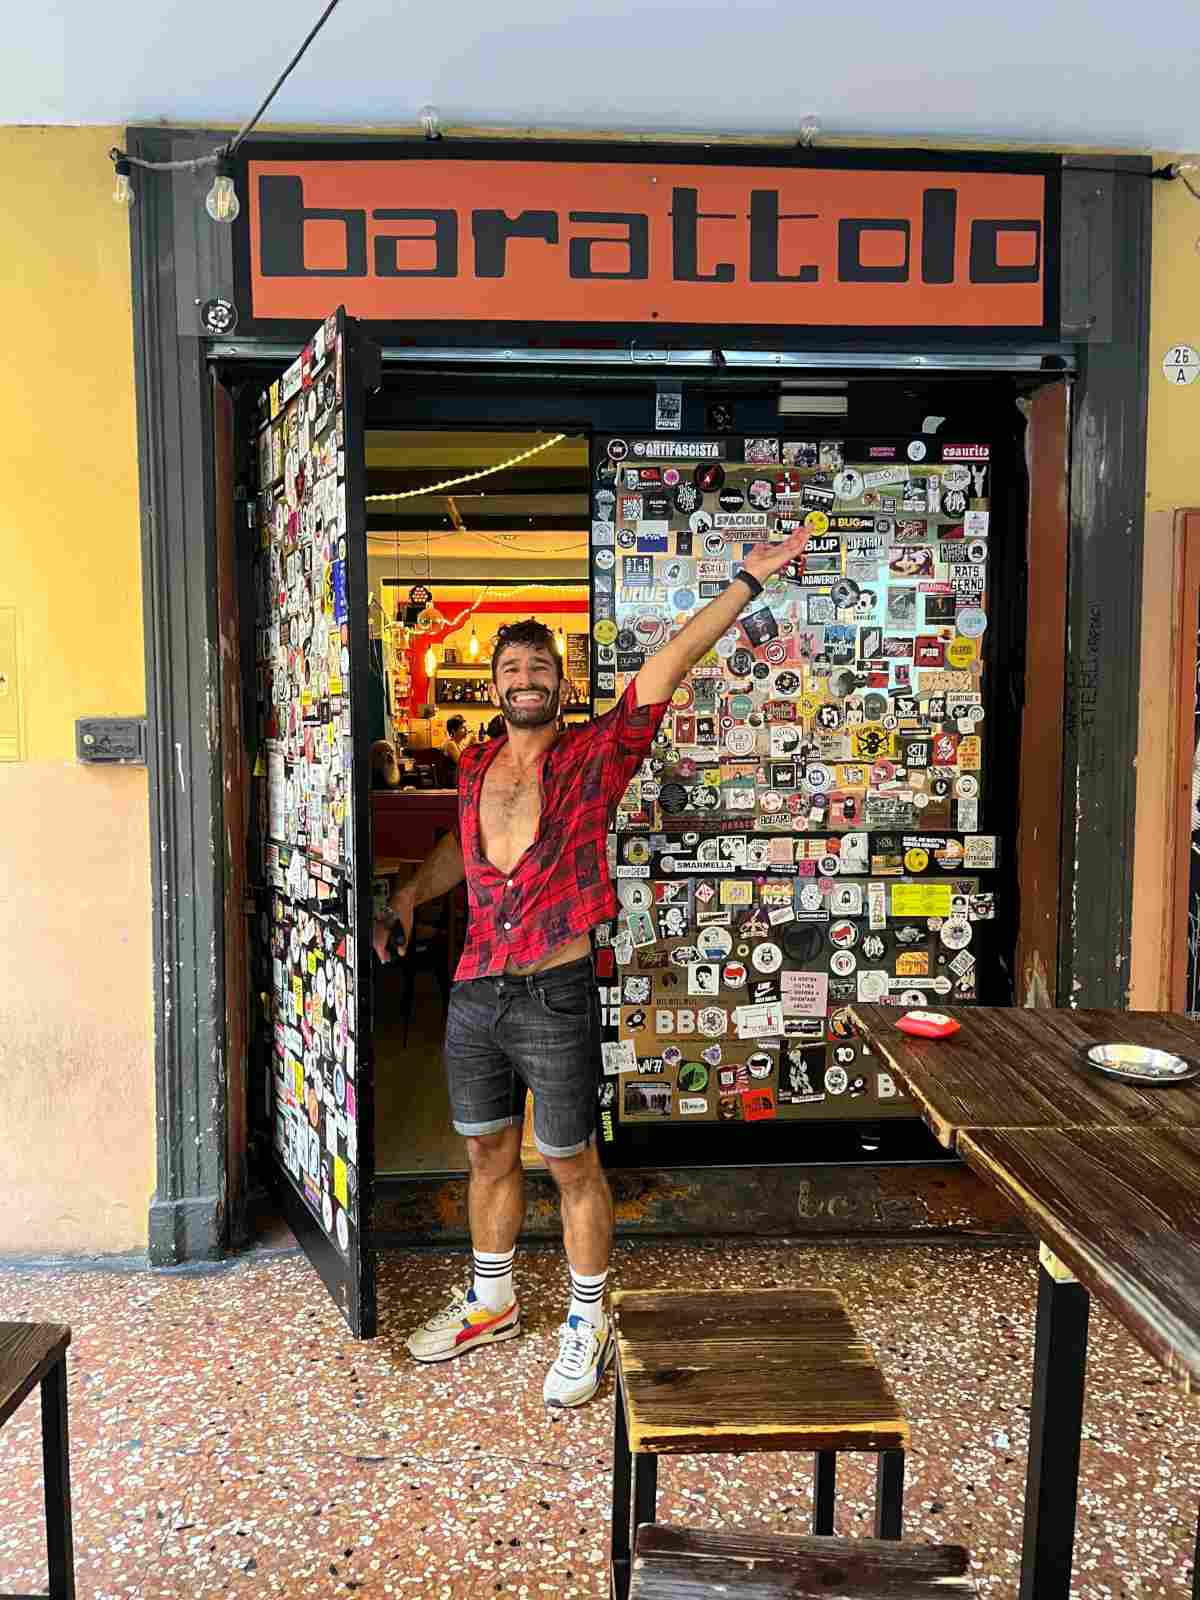 Stefan posing joyously in front of the door of the Barattolo gay bar in Bologna, Italy.